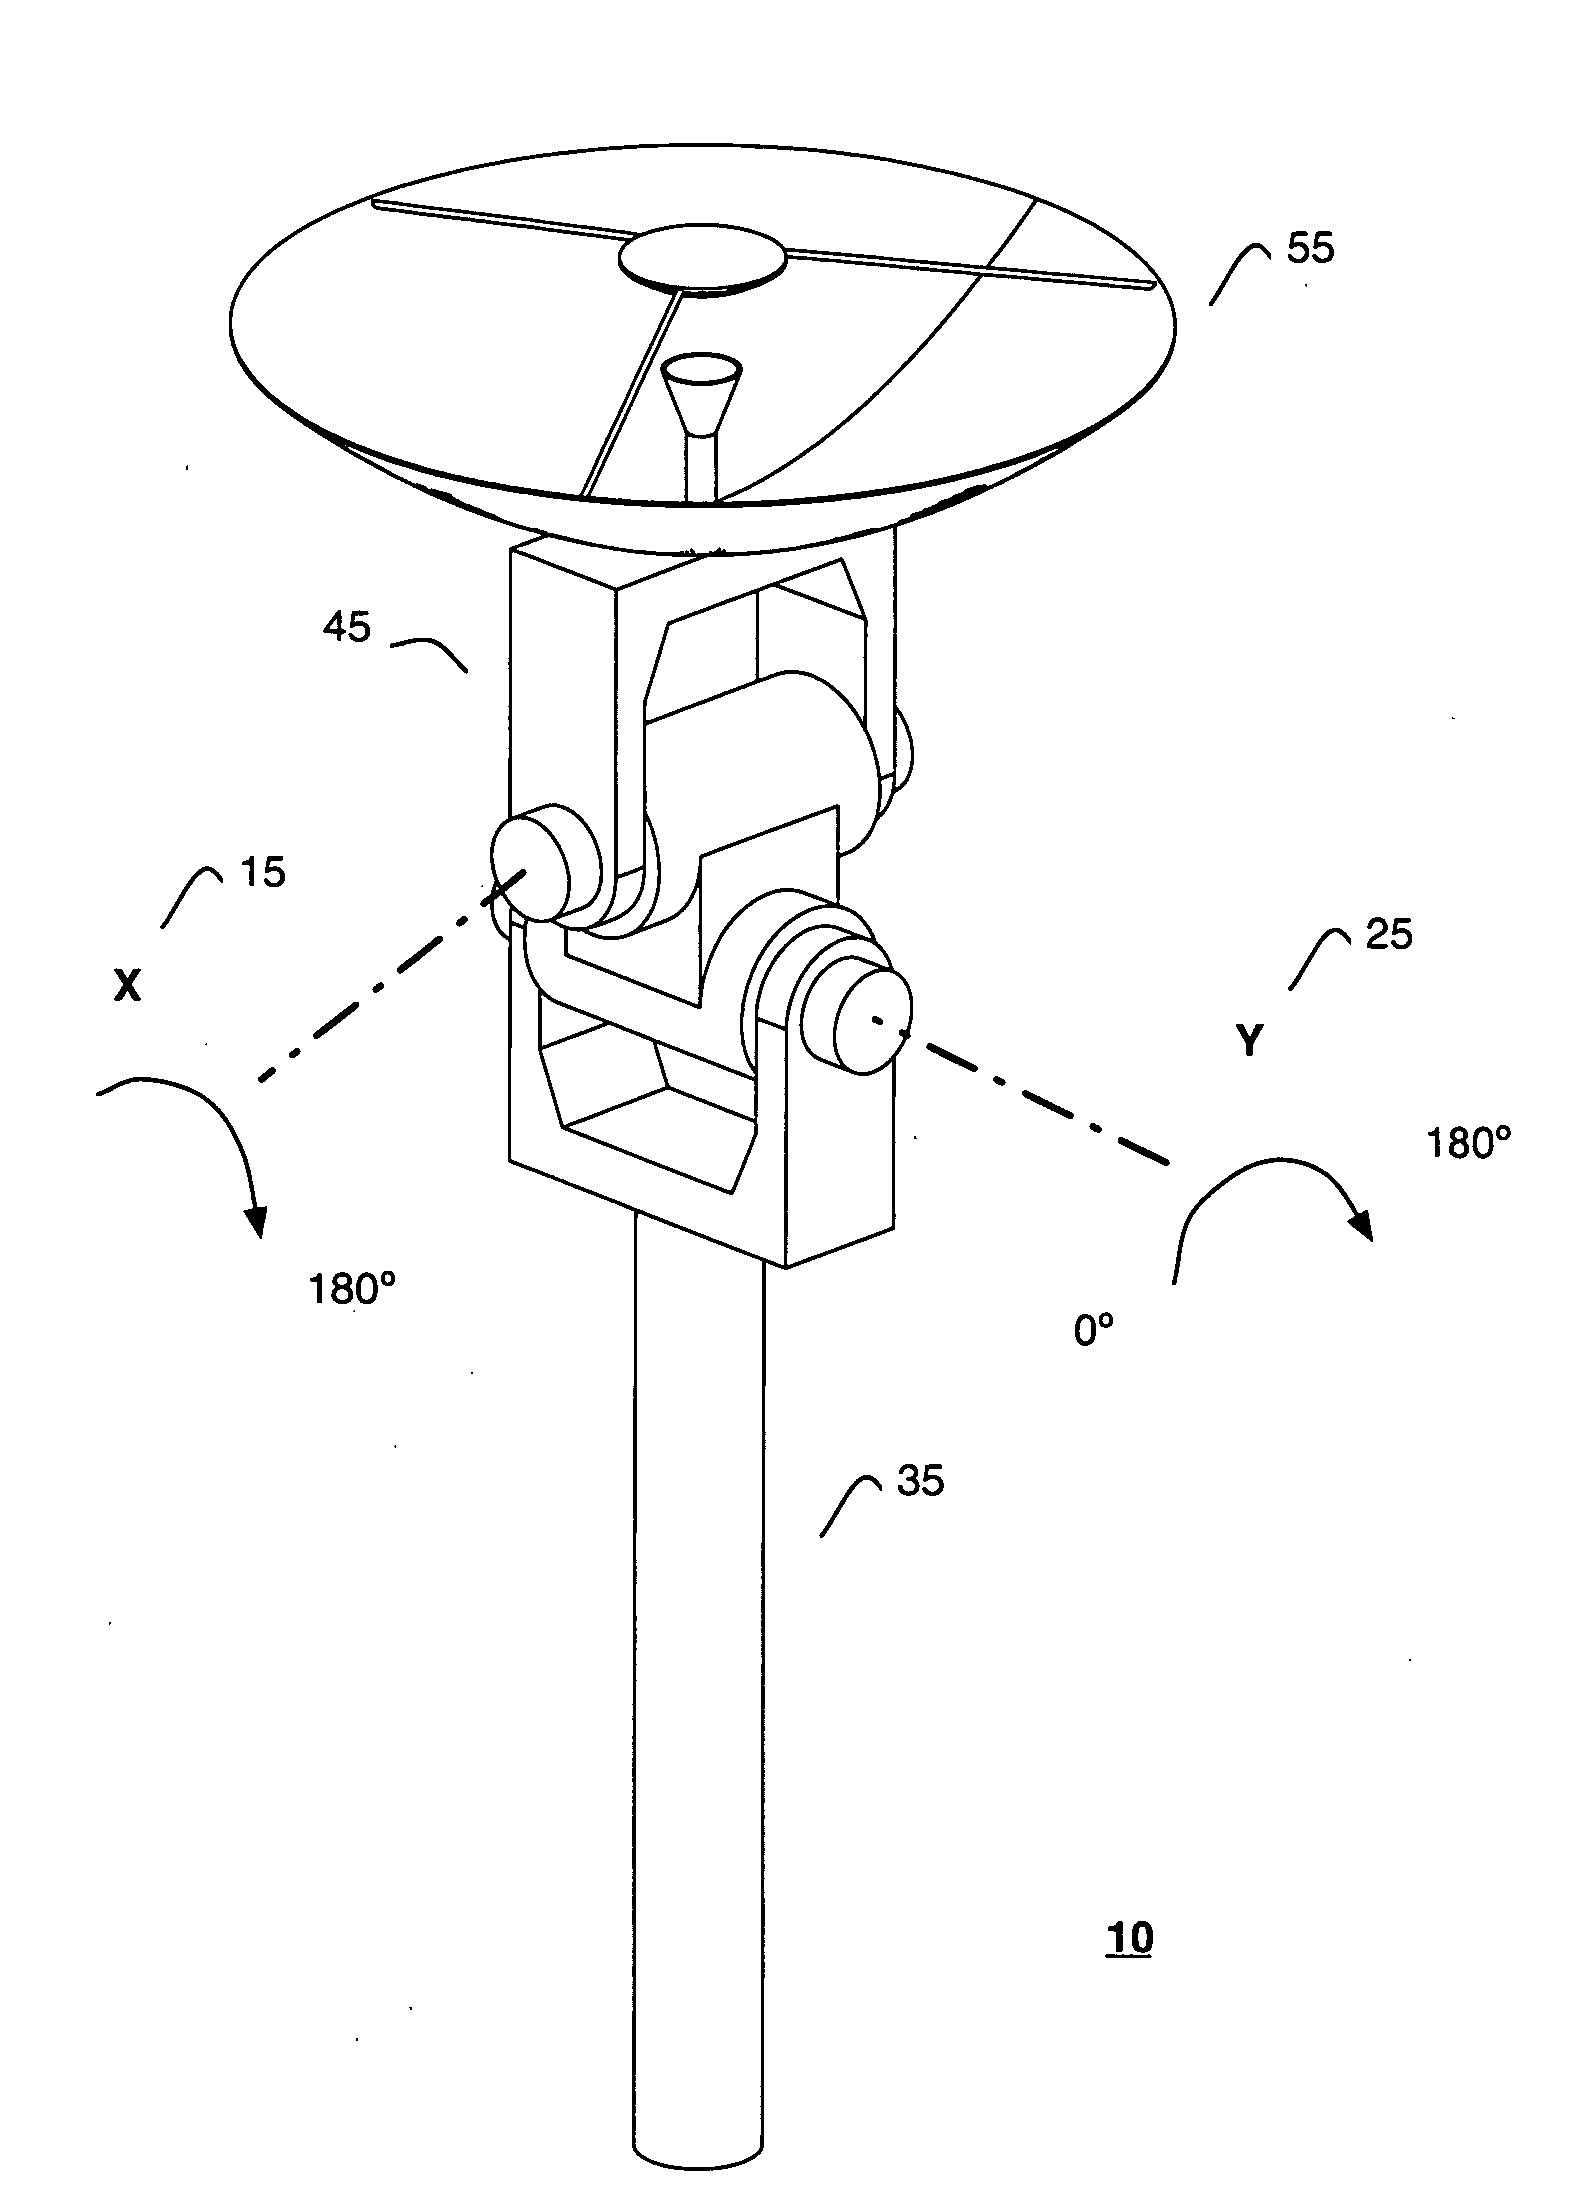 Method and apparatus for eliminating keyhole problems in an X-Y gimbal assembly